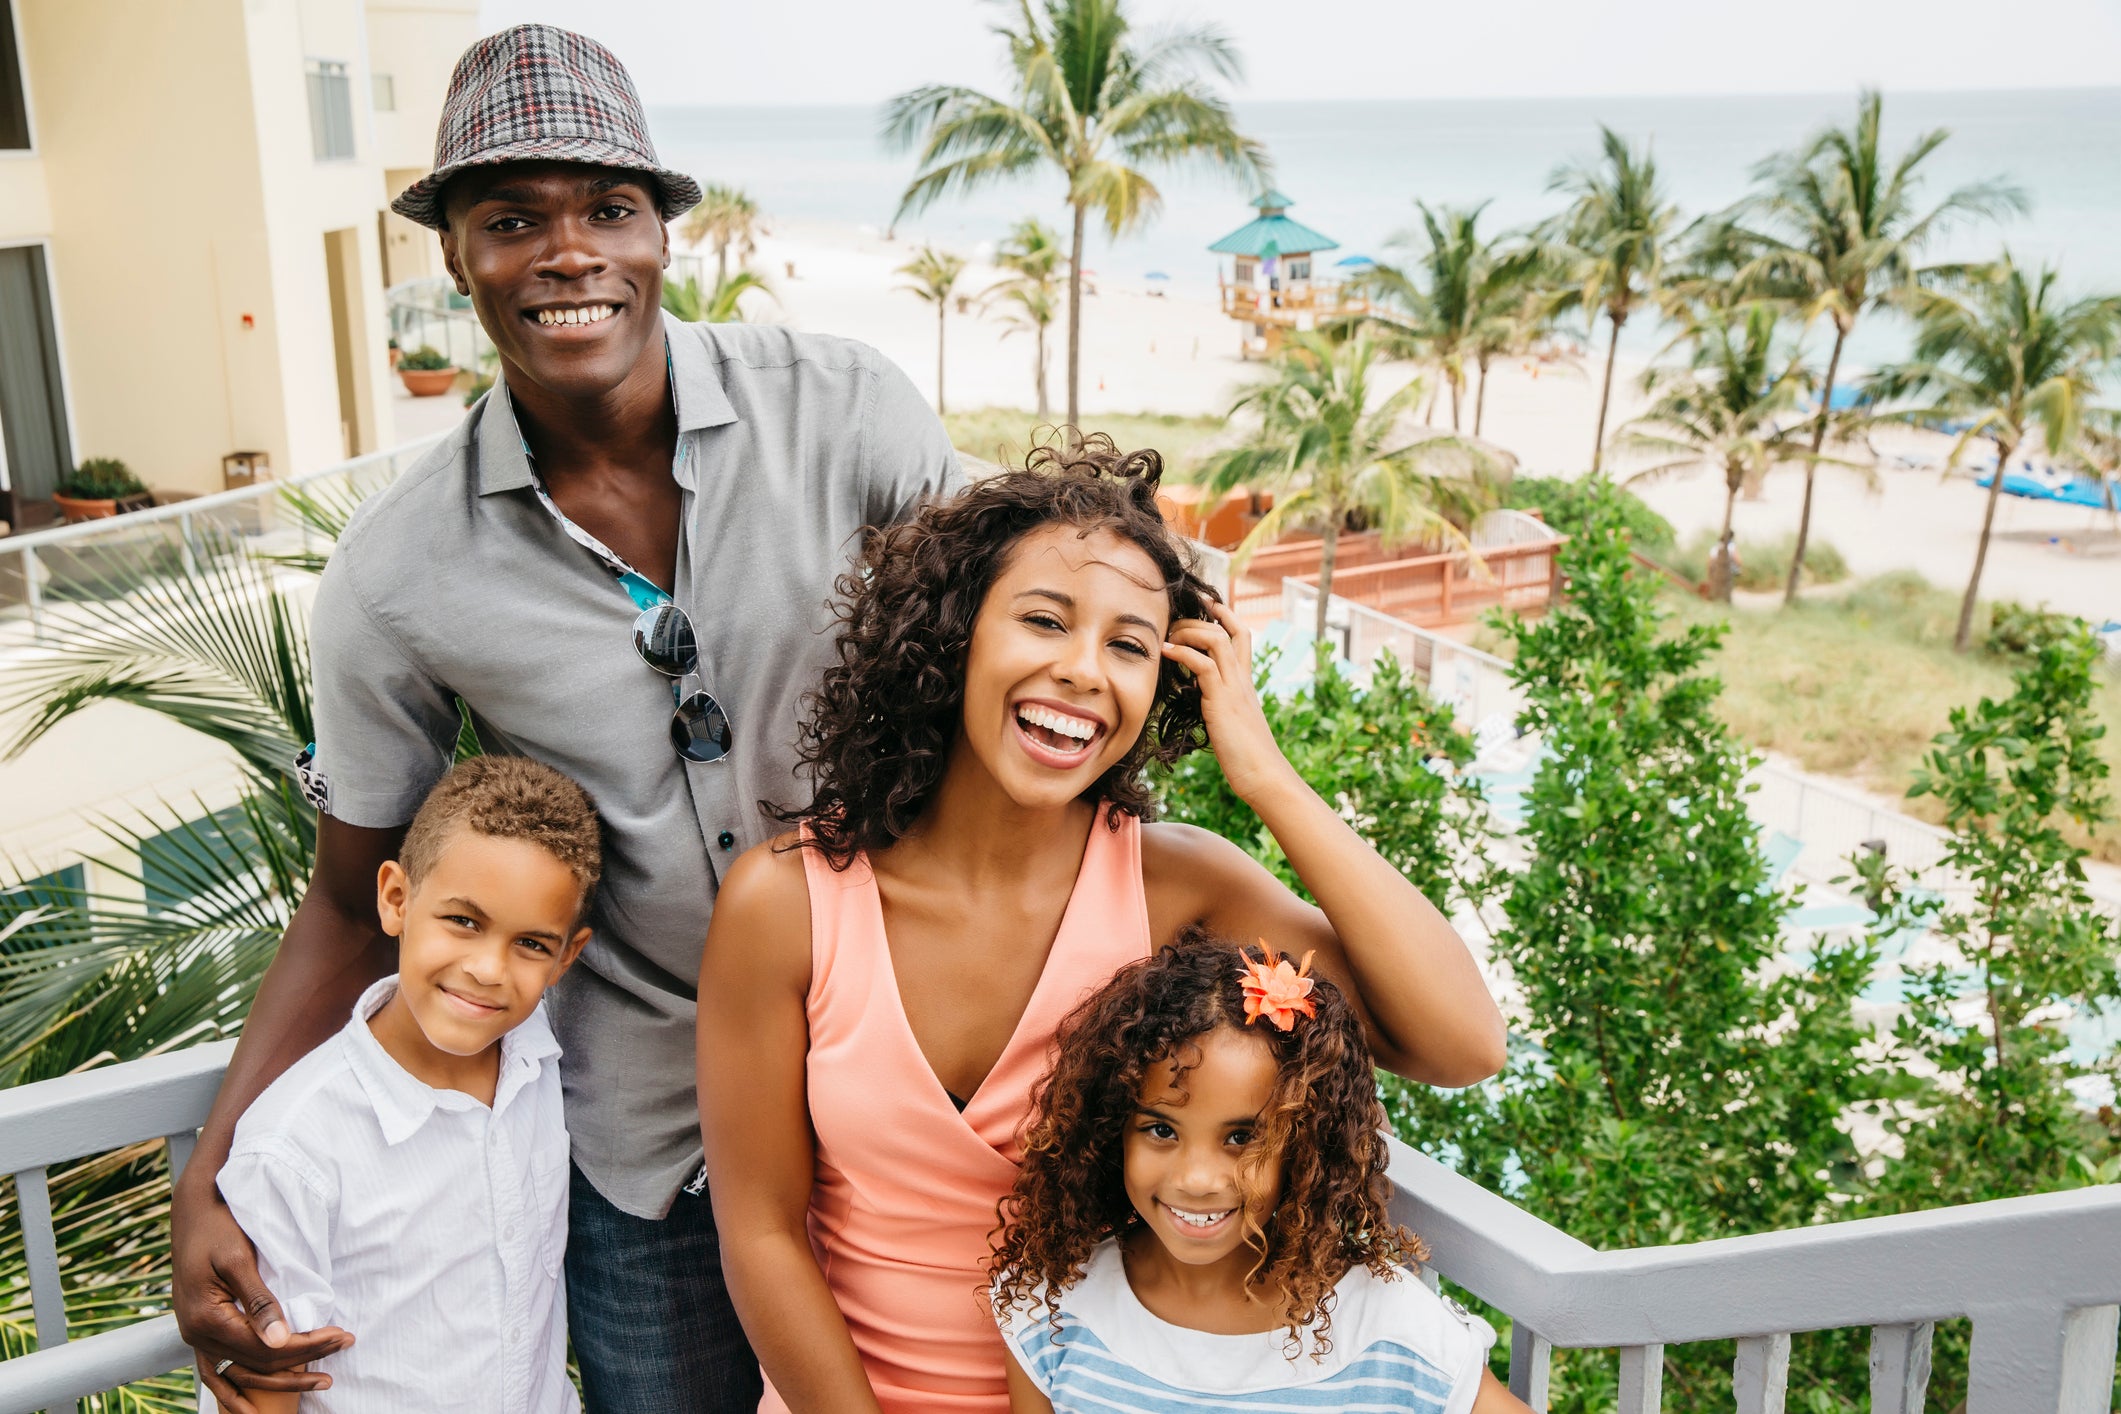 Travel Savings, Deals, And Discounts For Families Just In Time For Summer